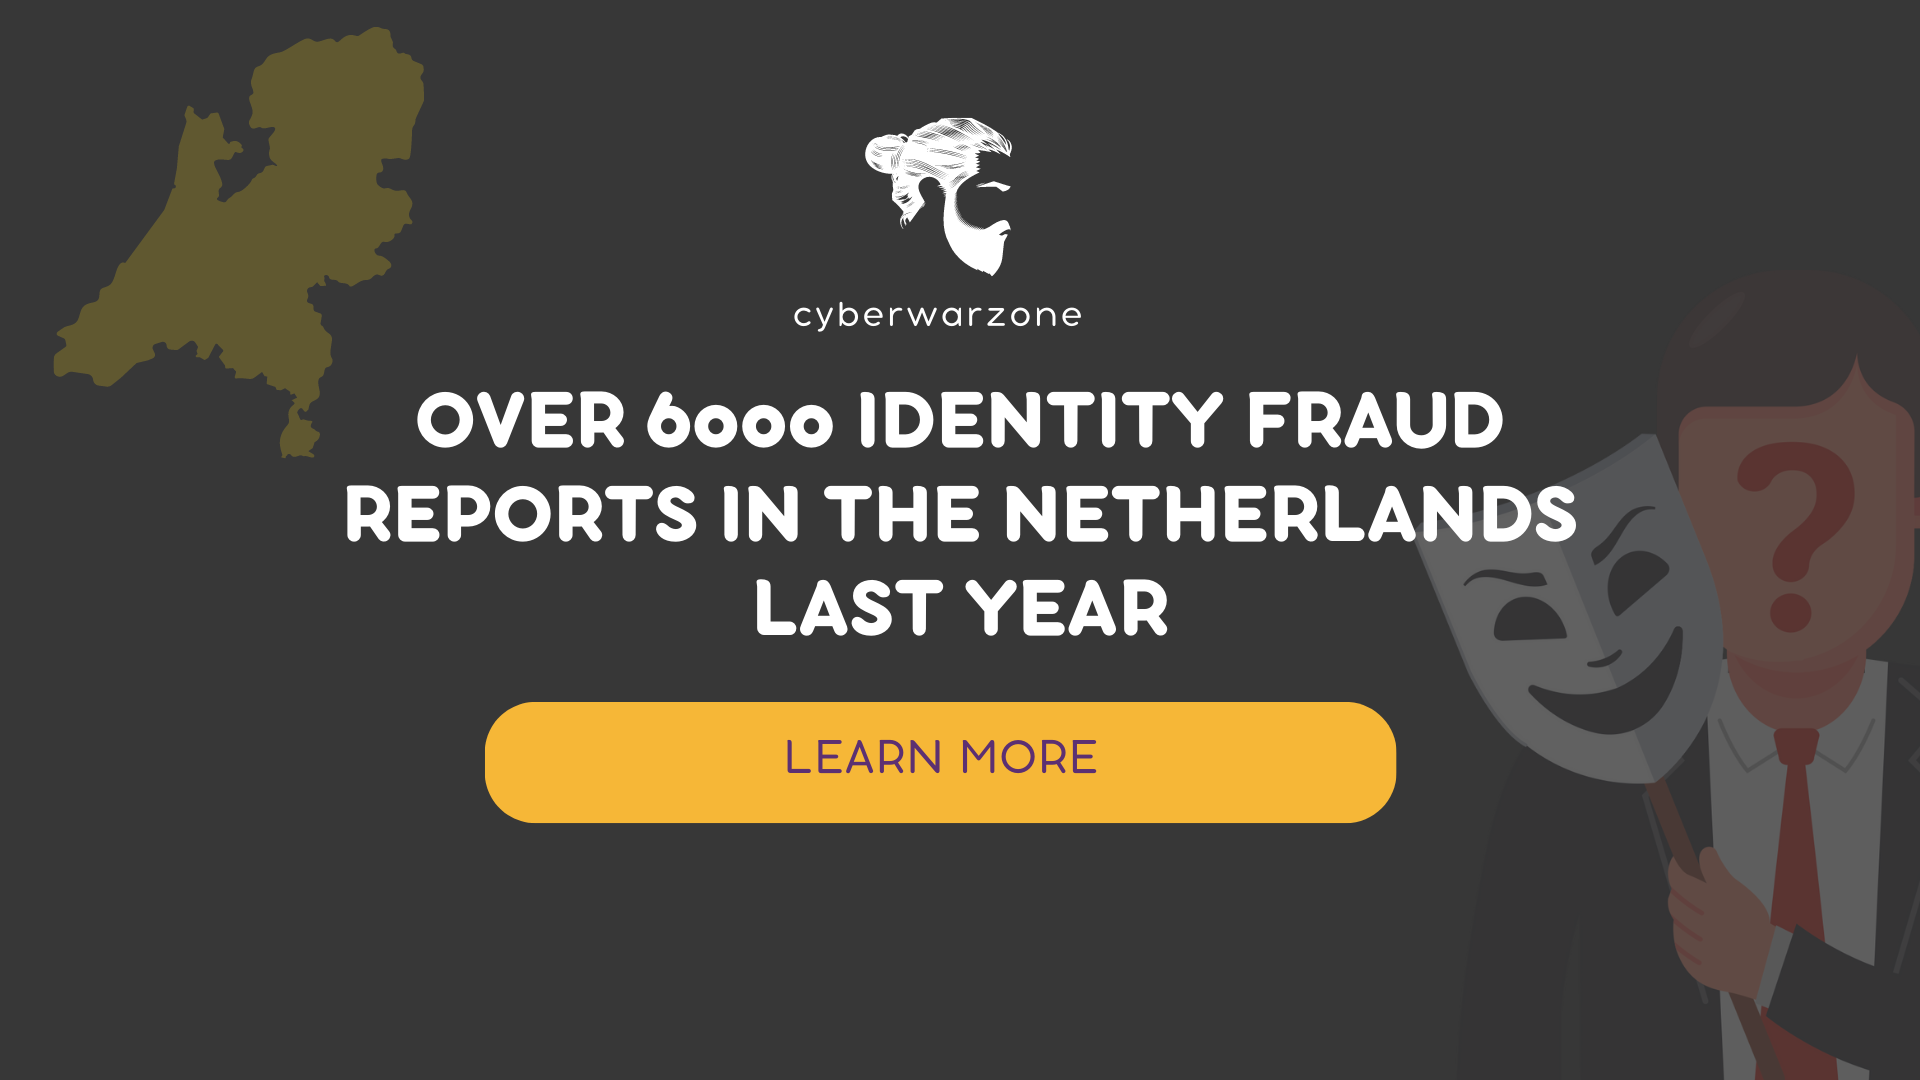 Over 6000 Identity Fraud Reports in the Netherlands Last Year